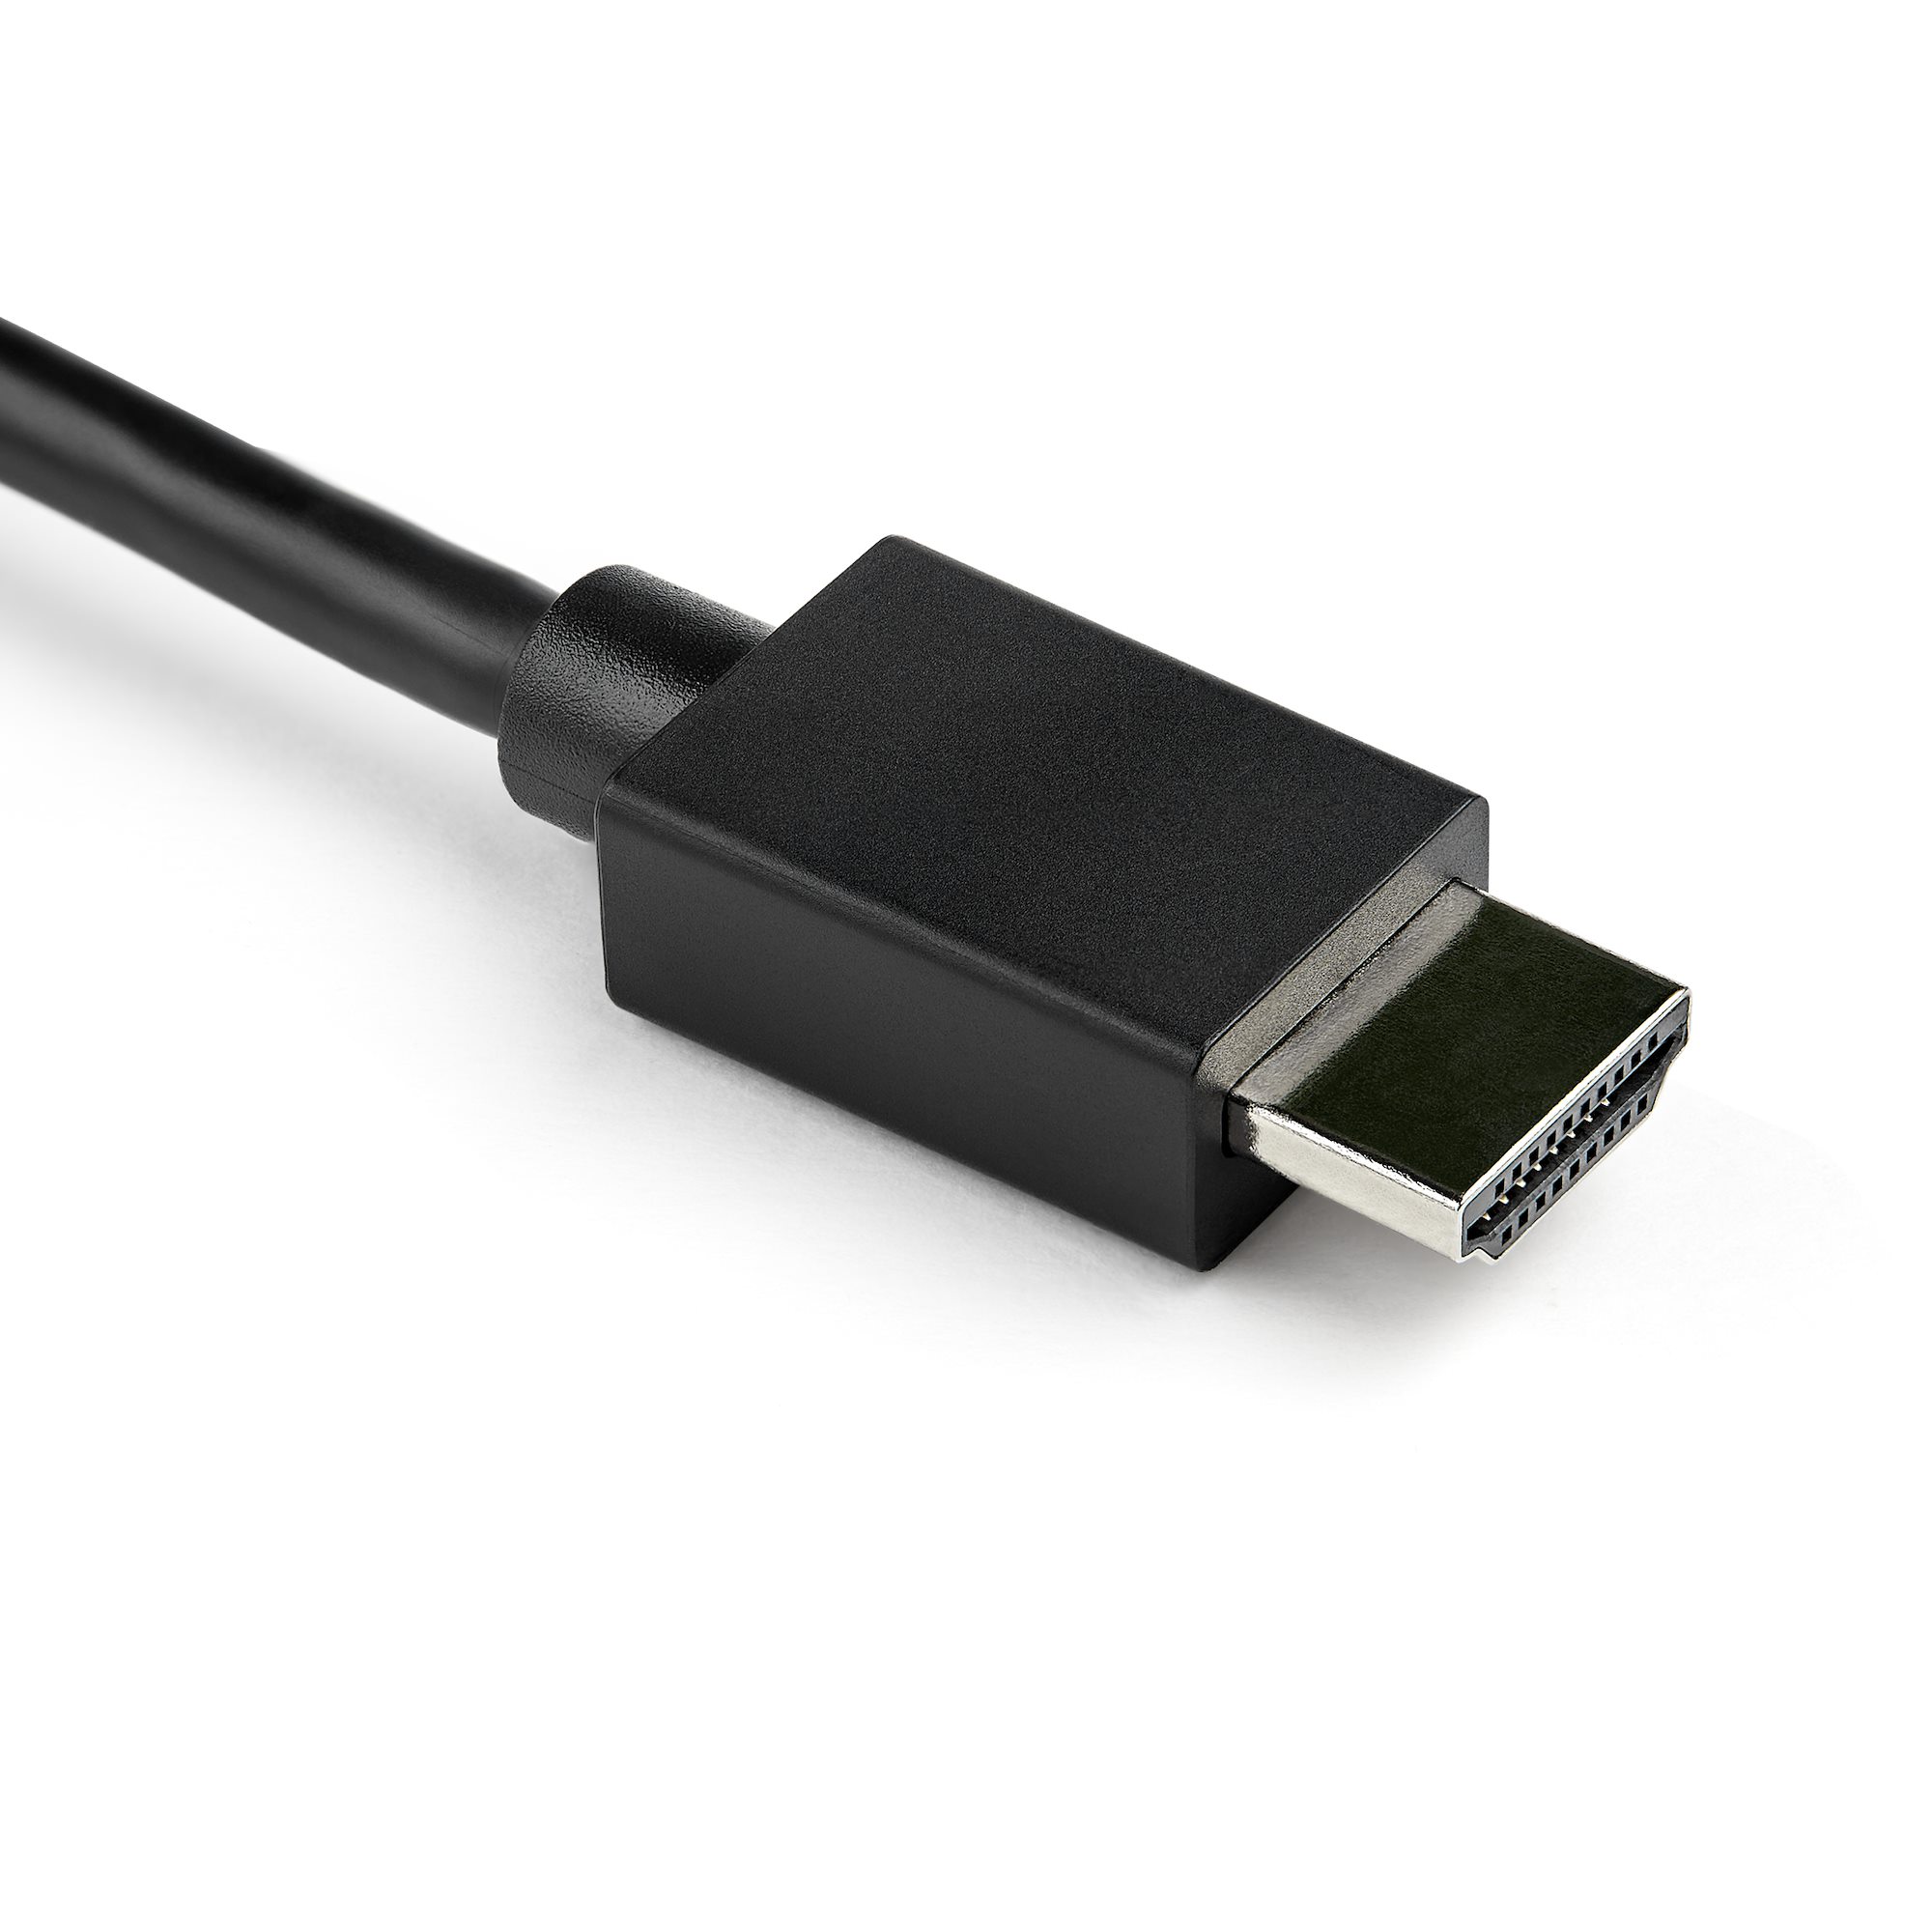 USB power and digital video cable